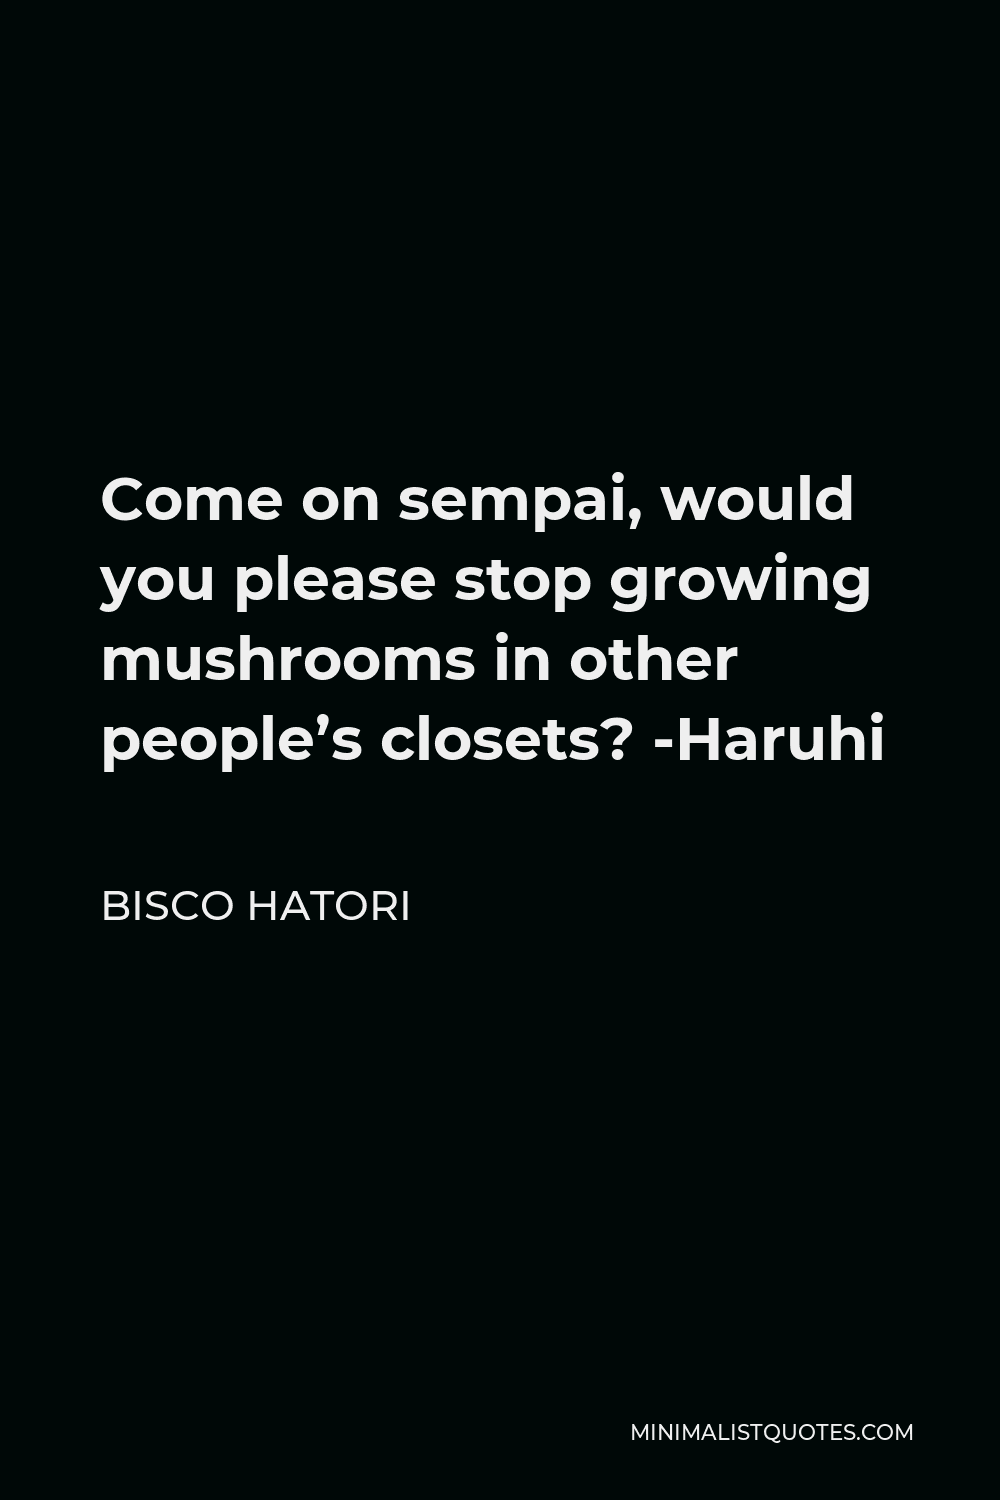 Bisco Hatori Quote - Come on sempai, would you please stop growing mushrooms in other people’s closets? -Haruhi